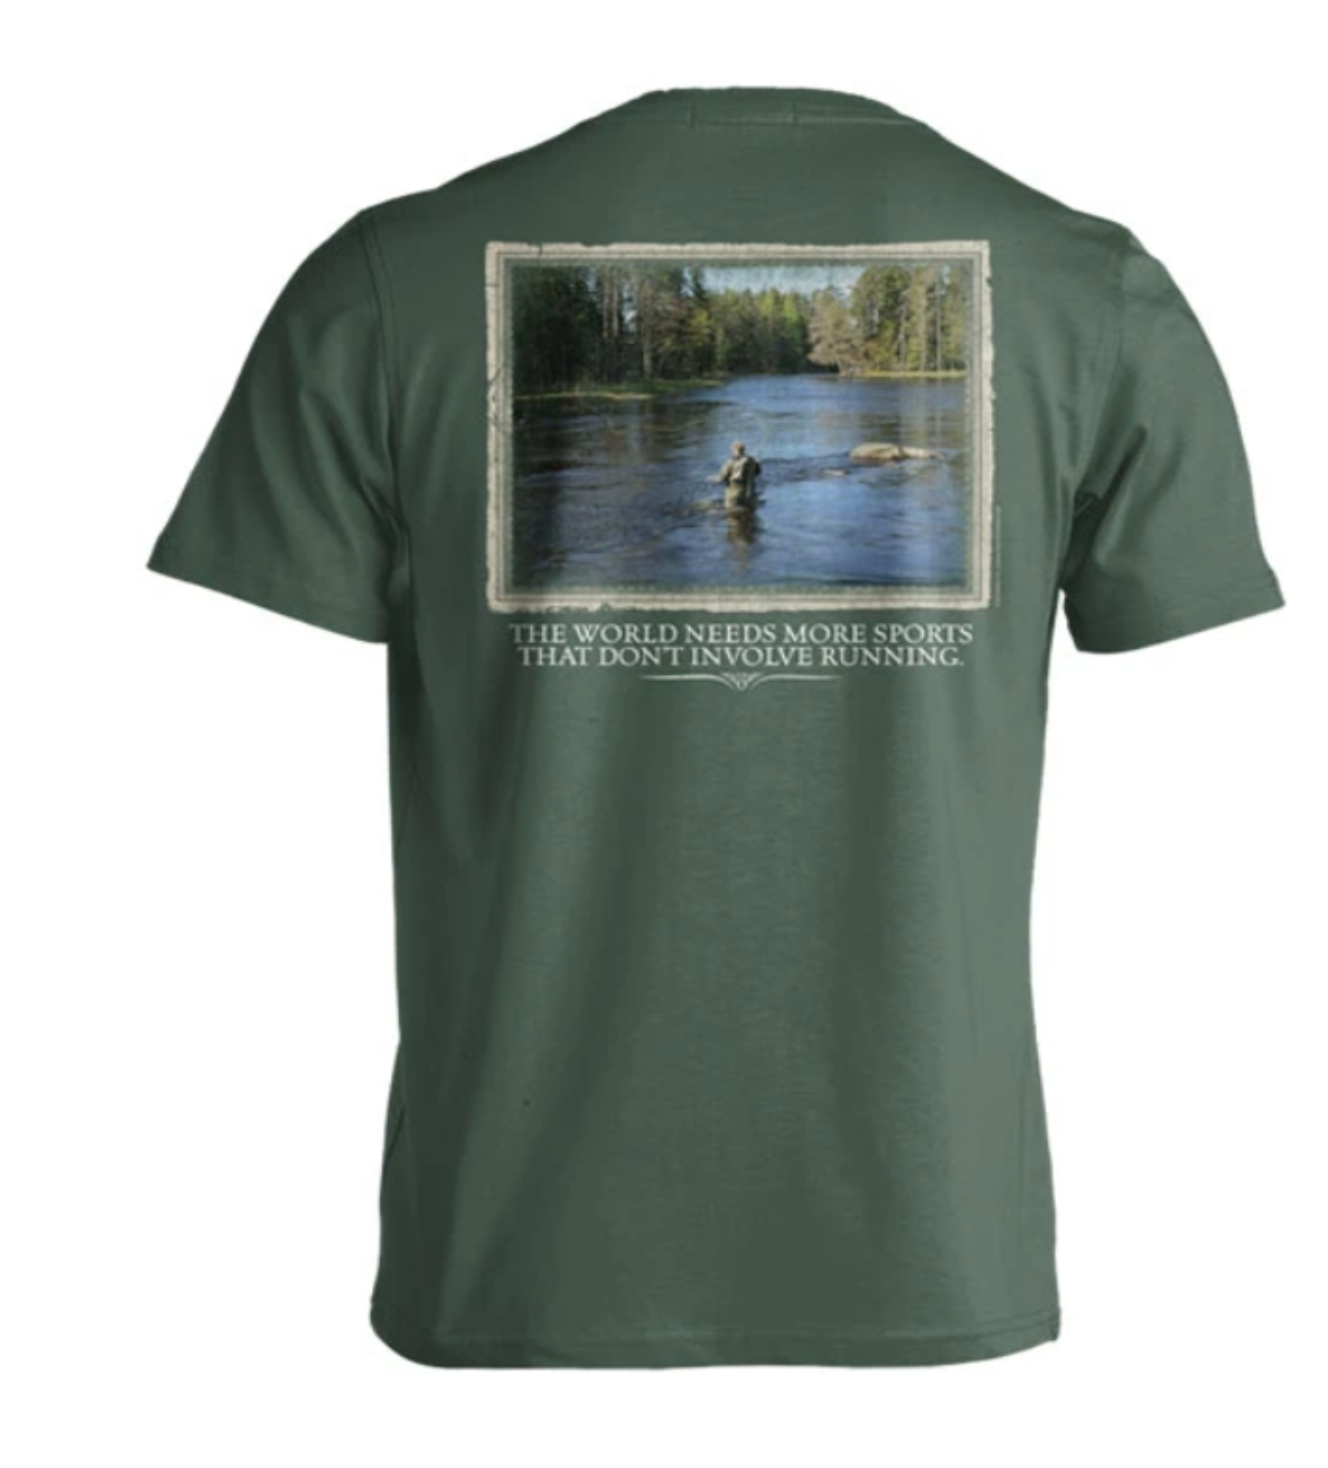 Fishing Sport - Short Sleeve T-Shirt by Off The Map